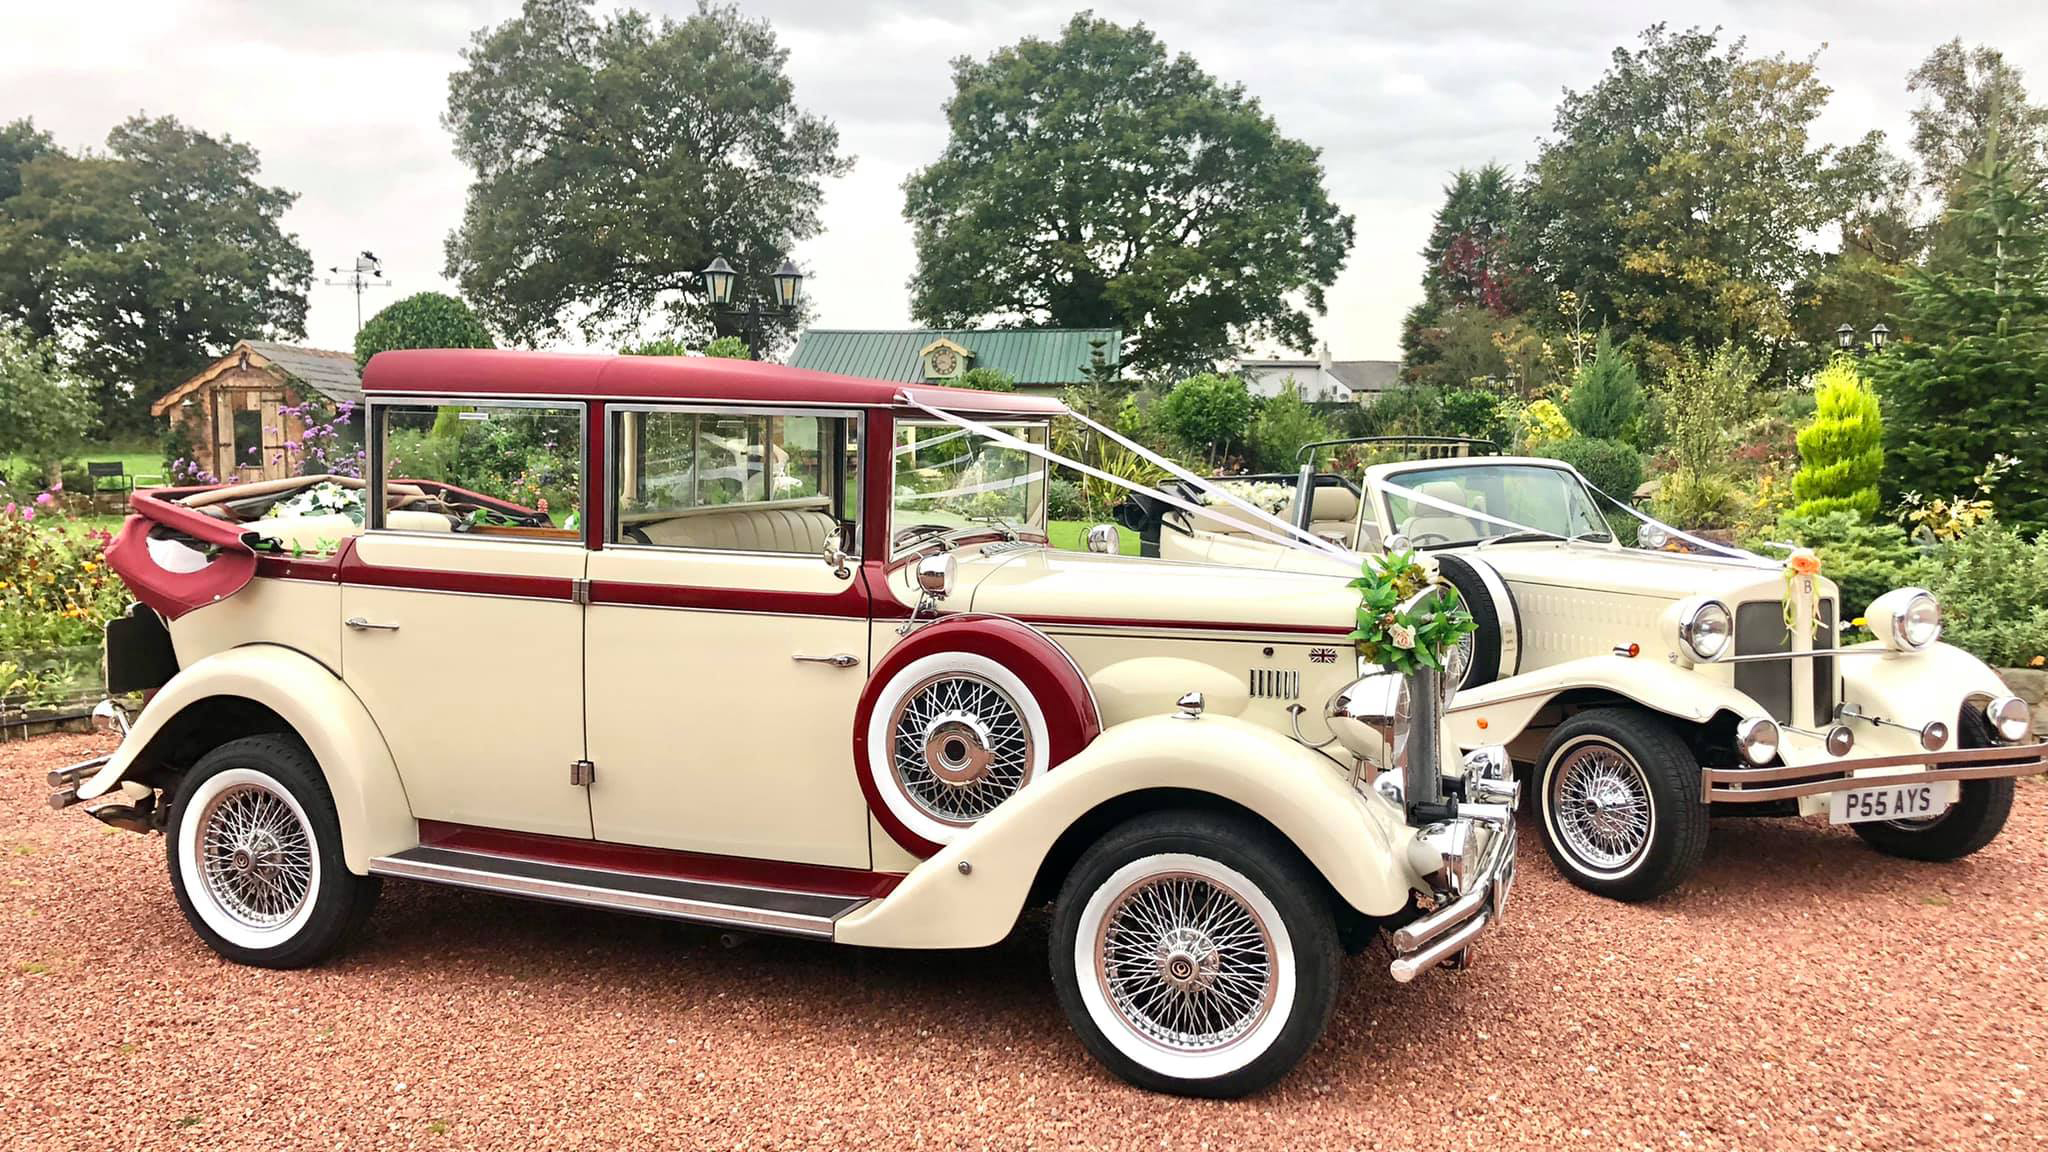 Two vintage wedding cars decorated with white ribbons at a local Warrington wedding. Both vehicles are parked side-by-side